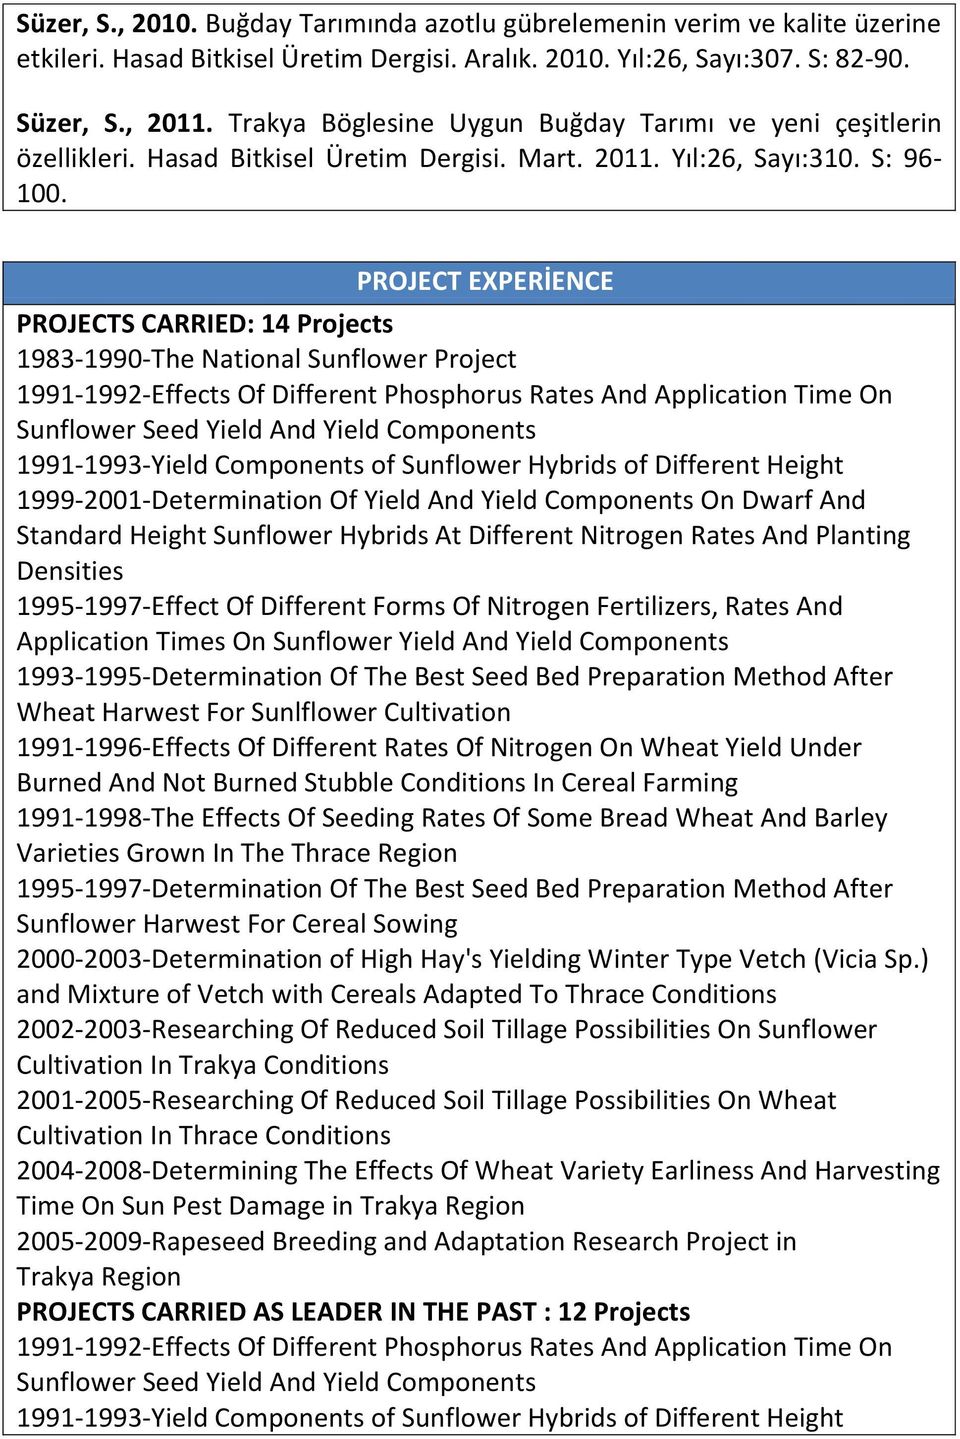 PROJECT EXPERİENCE PROJECTS CARRIED: 14 Projects 1983-1990-The National Sunflower Project 1991-1992-Effects Of Different Phosphorus Rates And Application Time On Sunflower Seed Yield And Yield